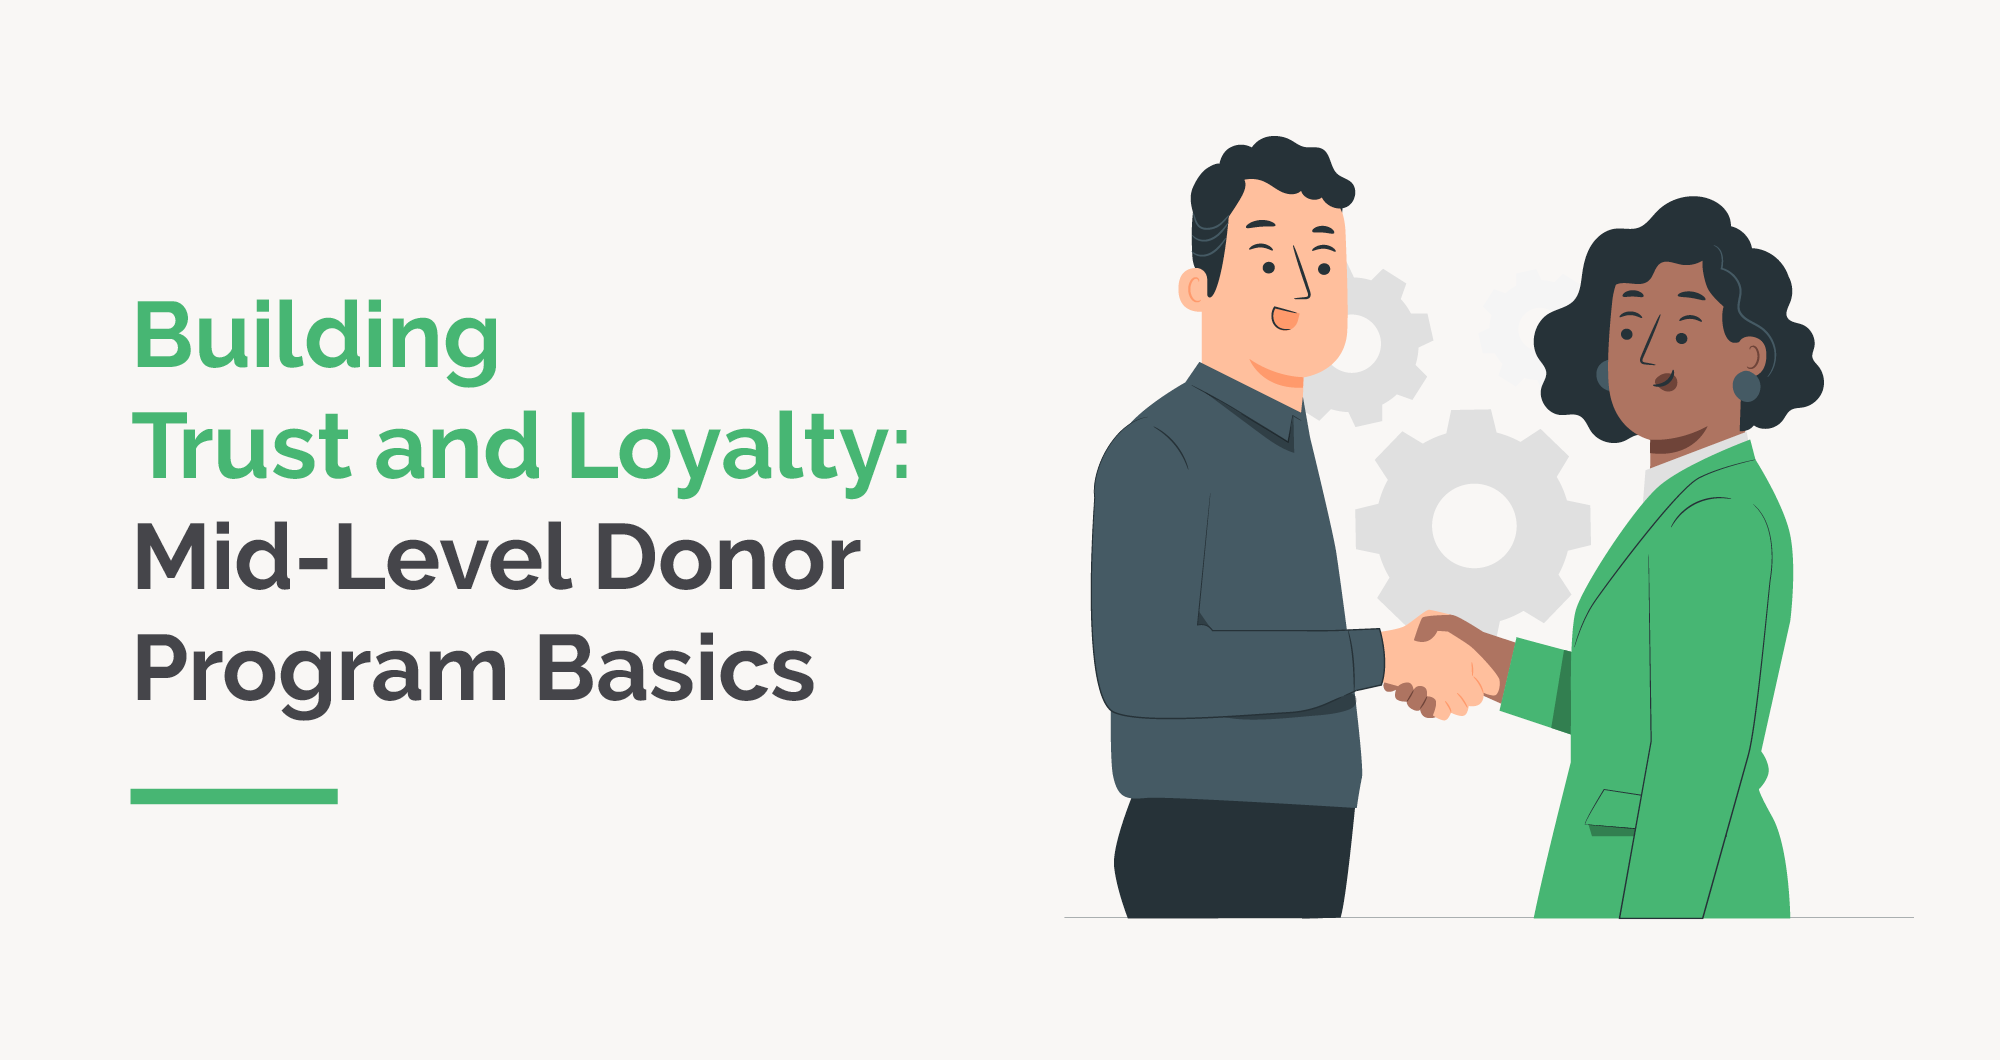 Building Trust and Loyalty: Mid-Level Donor Program Basics,” beside an illustrated nonprofit professional shaking hands with a donor